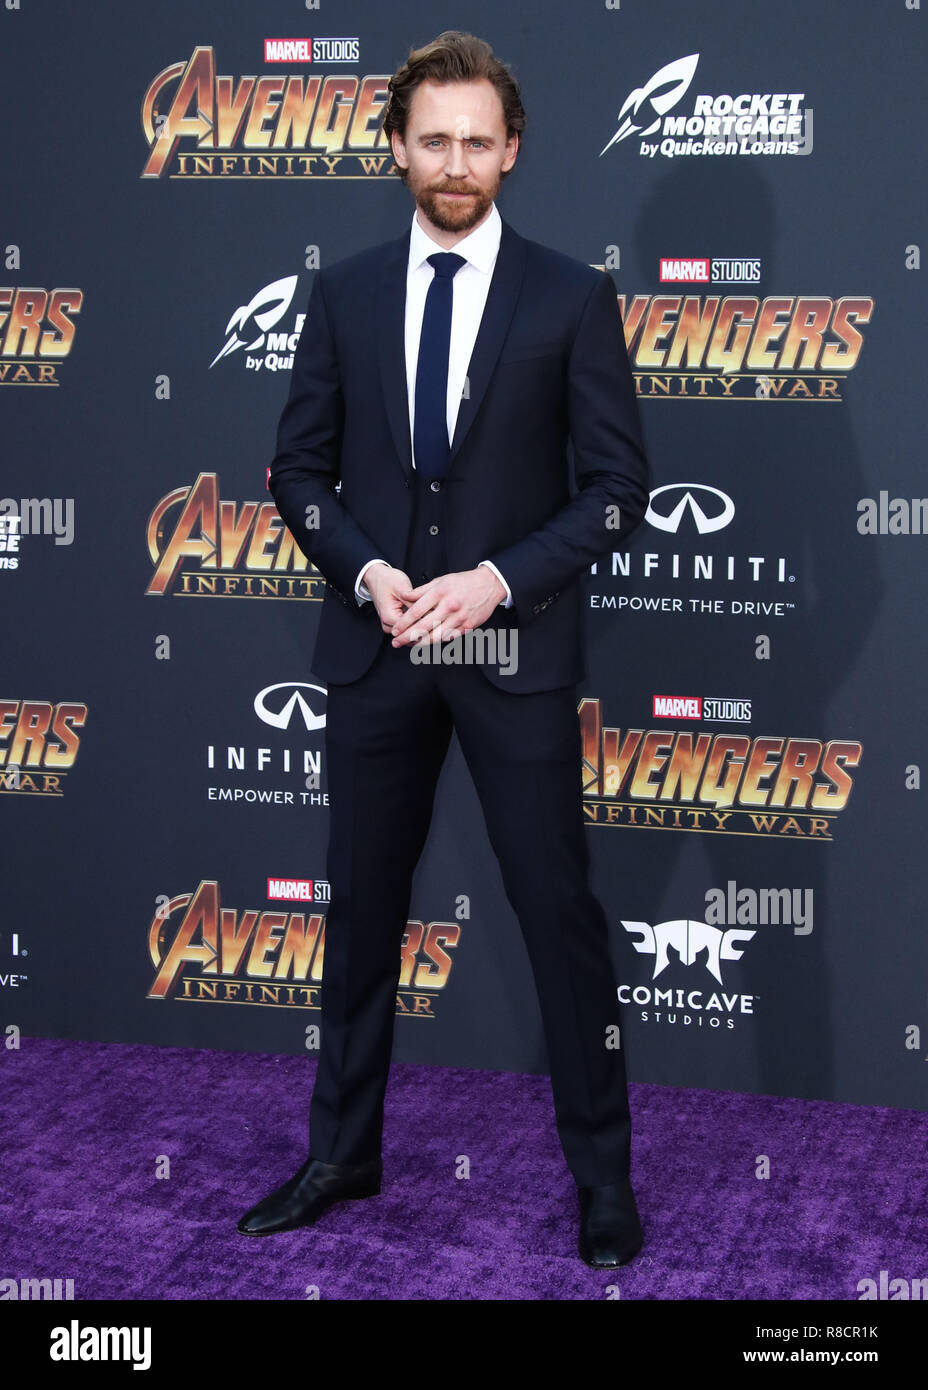 HOLLYWOOD, LOS ANGELES, CA, USA - APRIL 23: Tom Hiddleston at the World Premiere Of Disney And Marvel's 'Avengers: Infinity War' held at the El Capitan Theatre, Dolby Theatre and TCL Chinese Theatre IMAX on April 23, 2018 in Hollywood, Los Angeles, California, United States. (Photo by Xavier Collin/Image Press Agency) Stock Photo